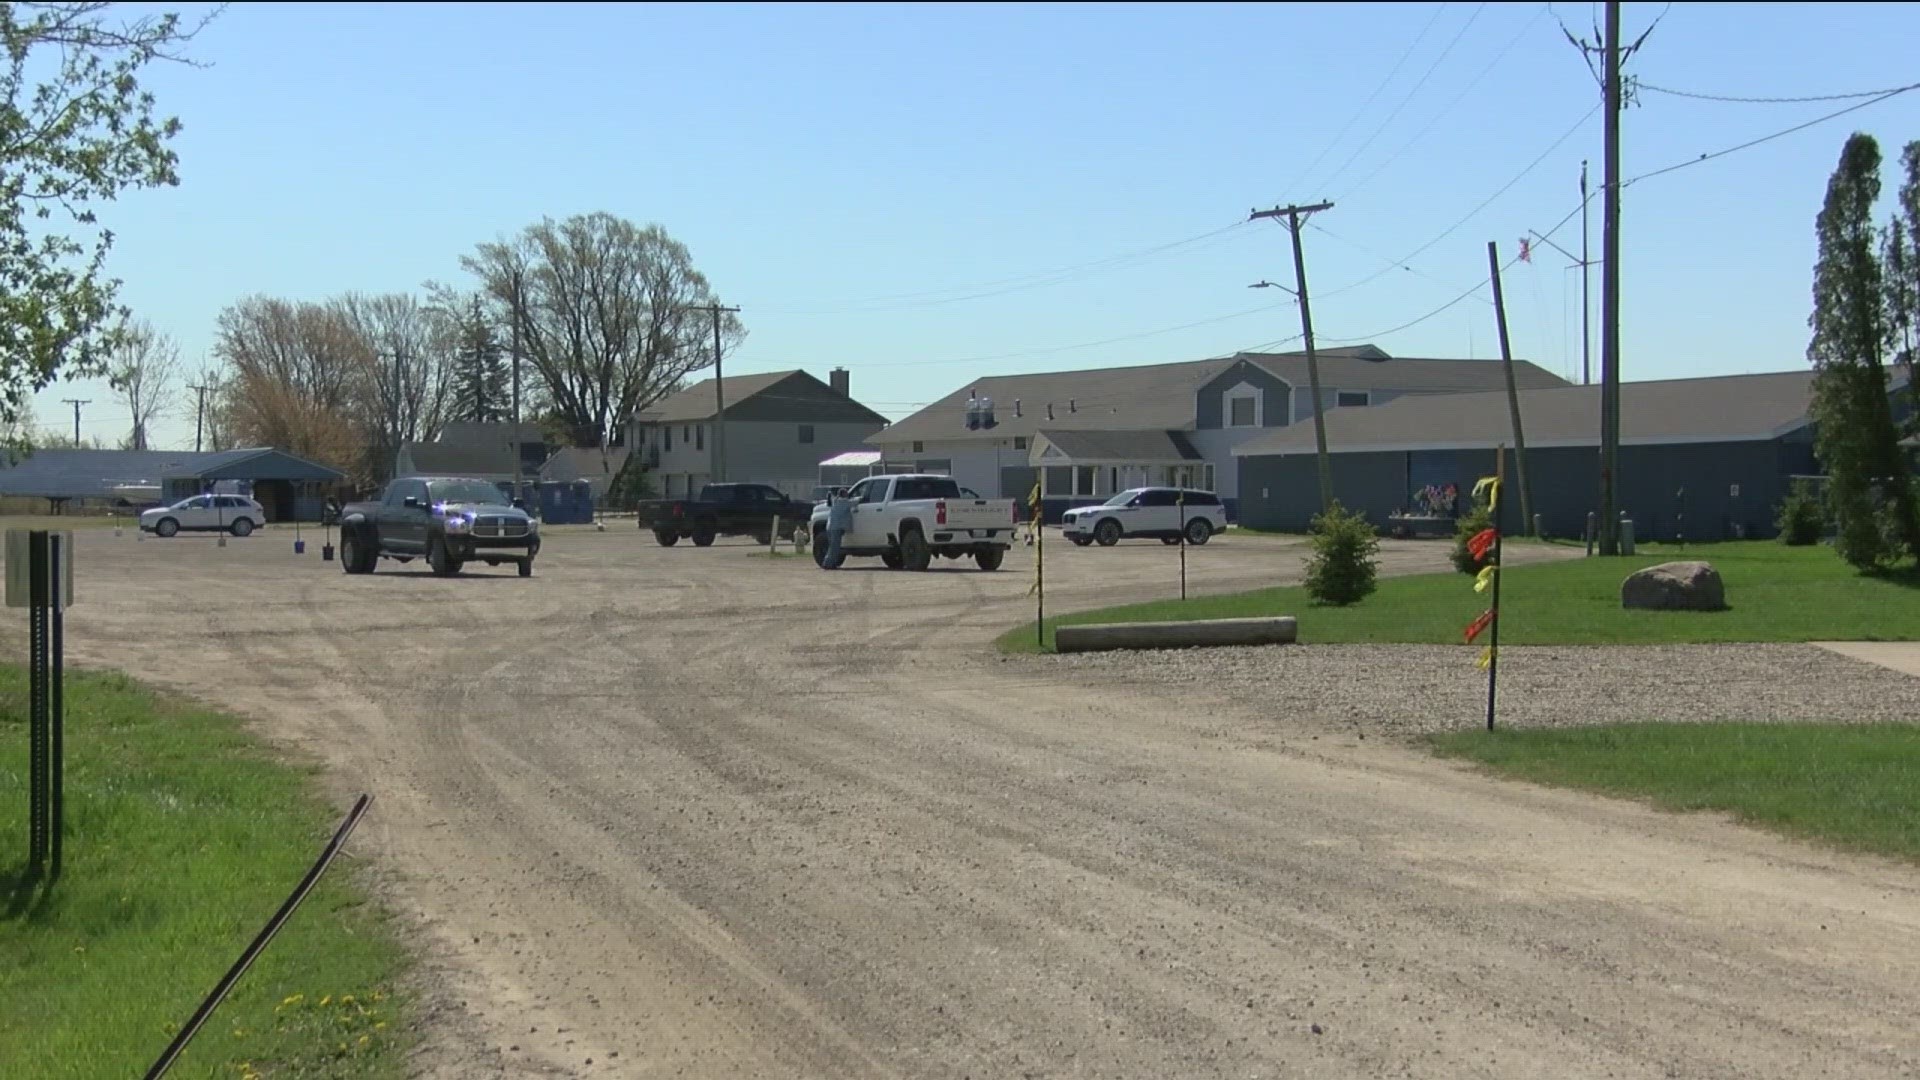 On Monday, we learned the conditions of those involved, including the identity of the two killed. WTOL 11 also confirmed the name of the suspect involved.